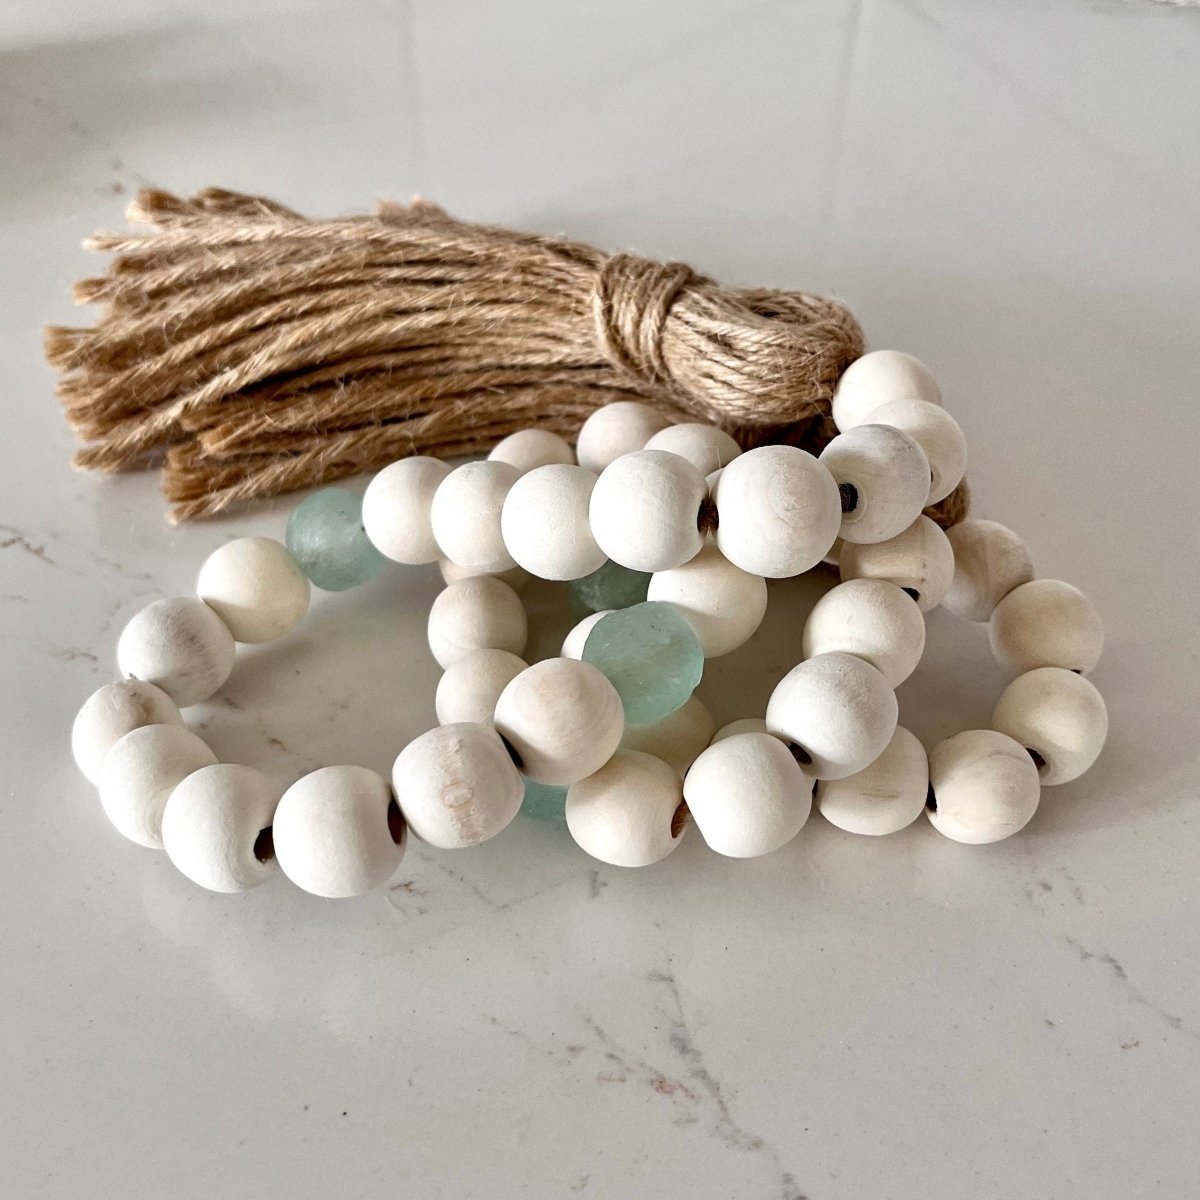 Whitewashed Wood Bead Garland with Aqua Recycled Glass Beads - sonder and wolf